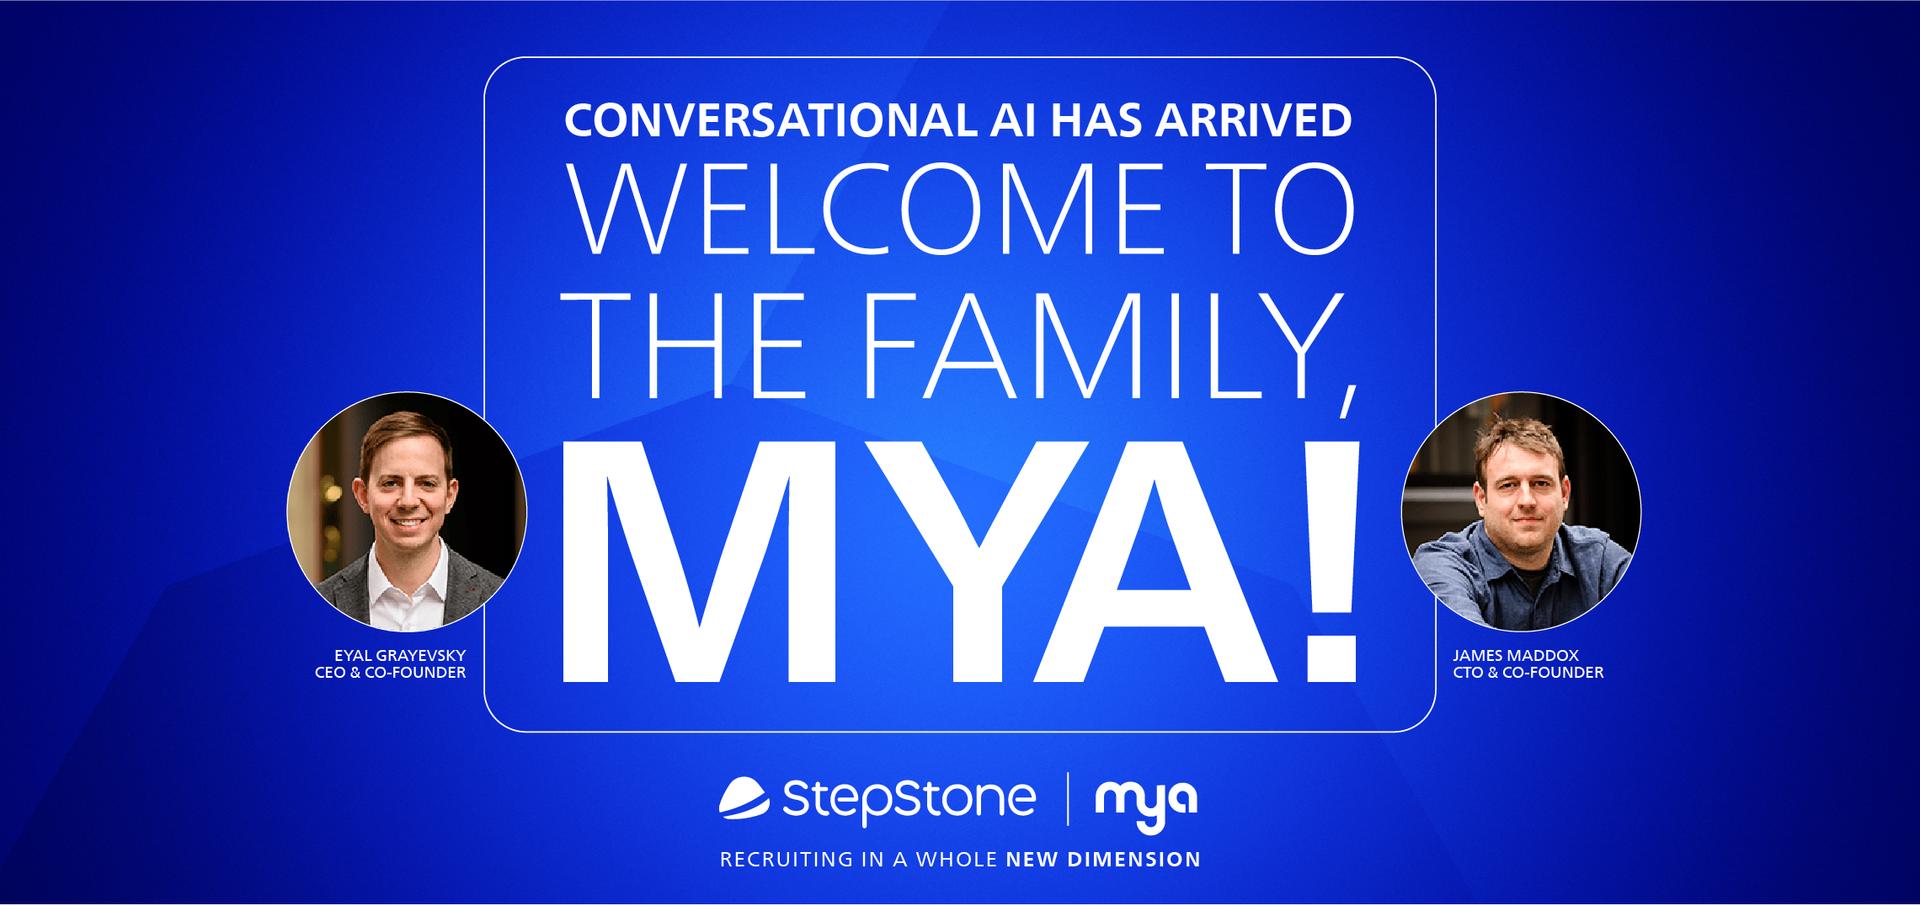 Image of Mya acquisition with "Welcome to the family, Mya!" written on it.